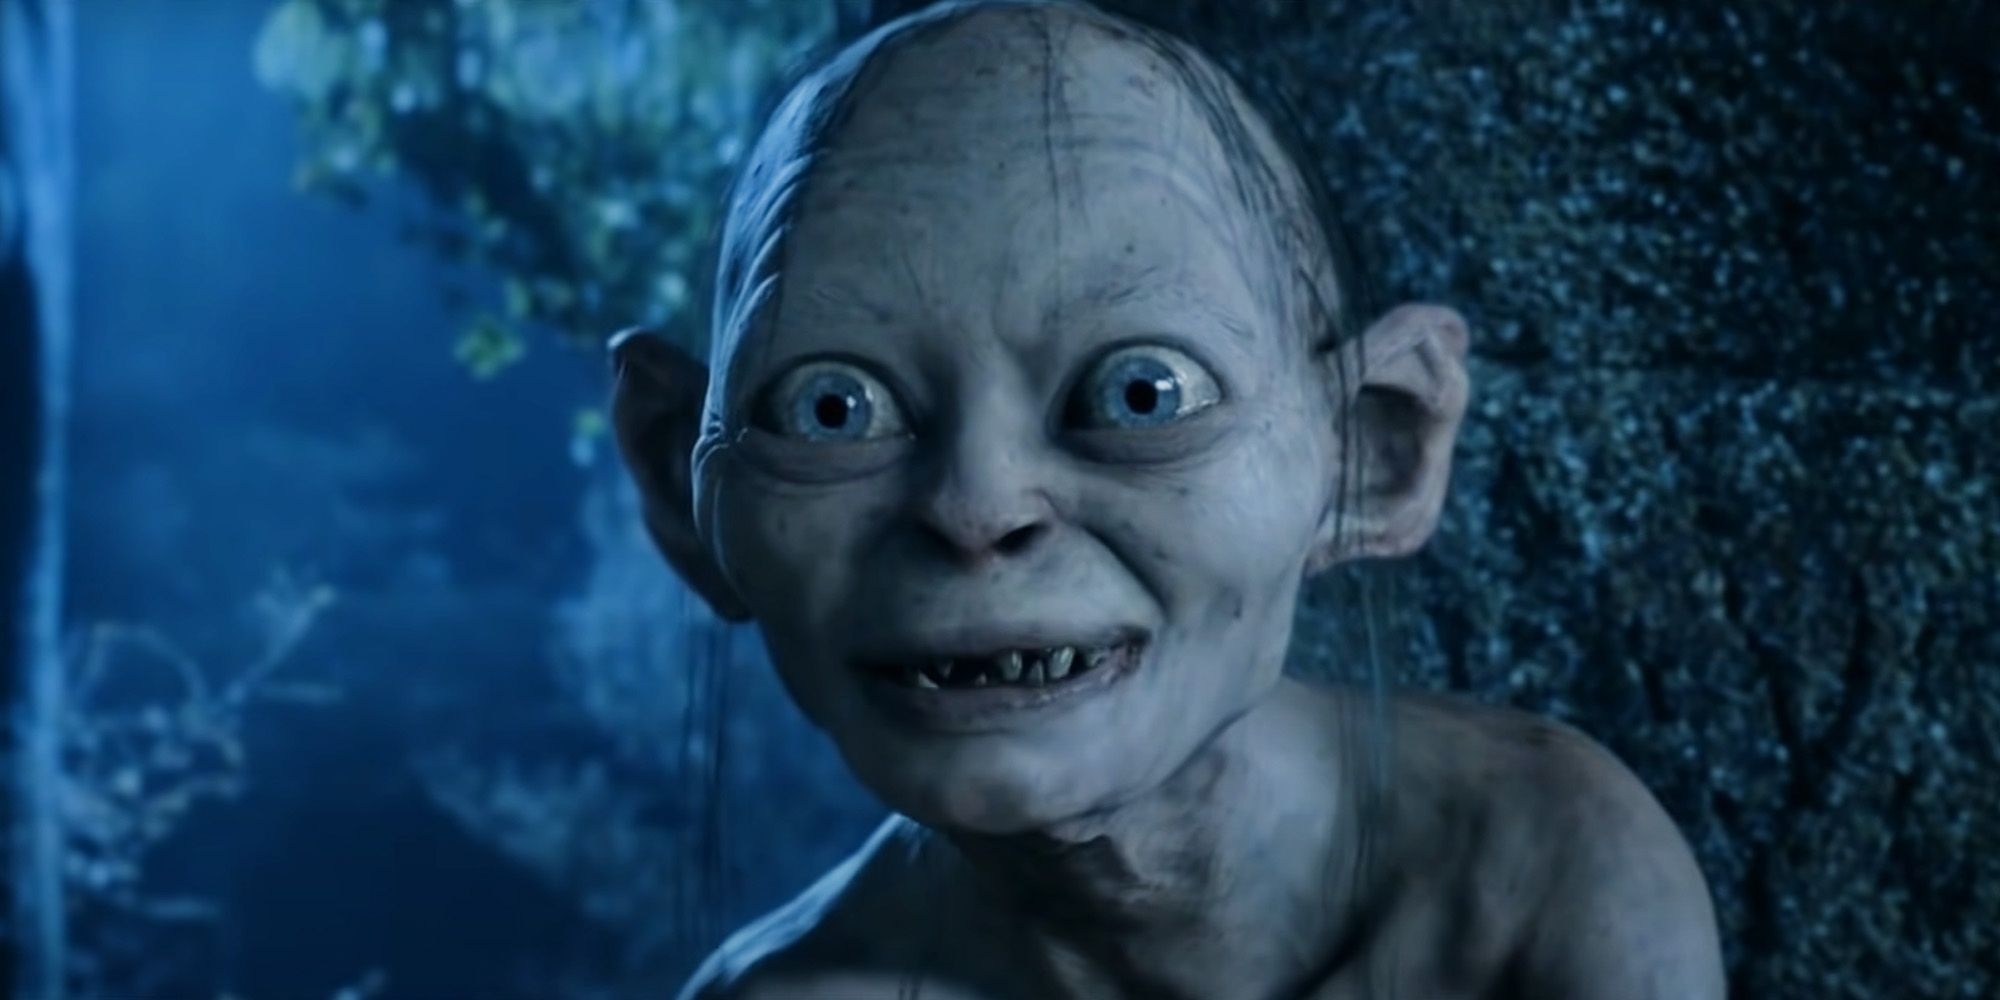 Gollym smiling at someone off-camera in The Lord of the Rings: The Two Towers.